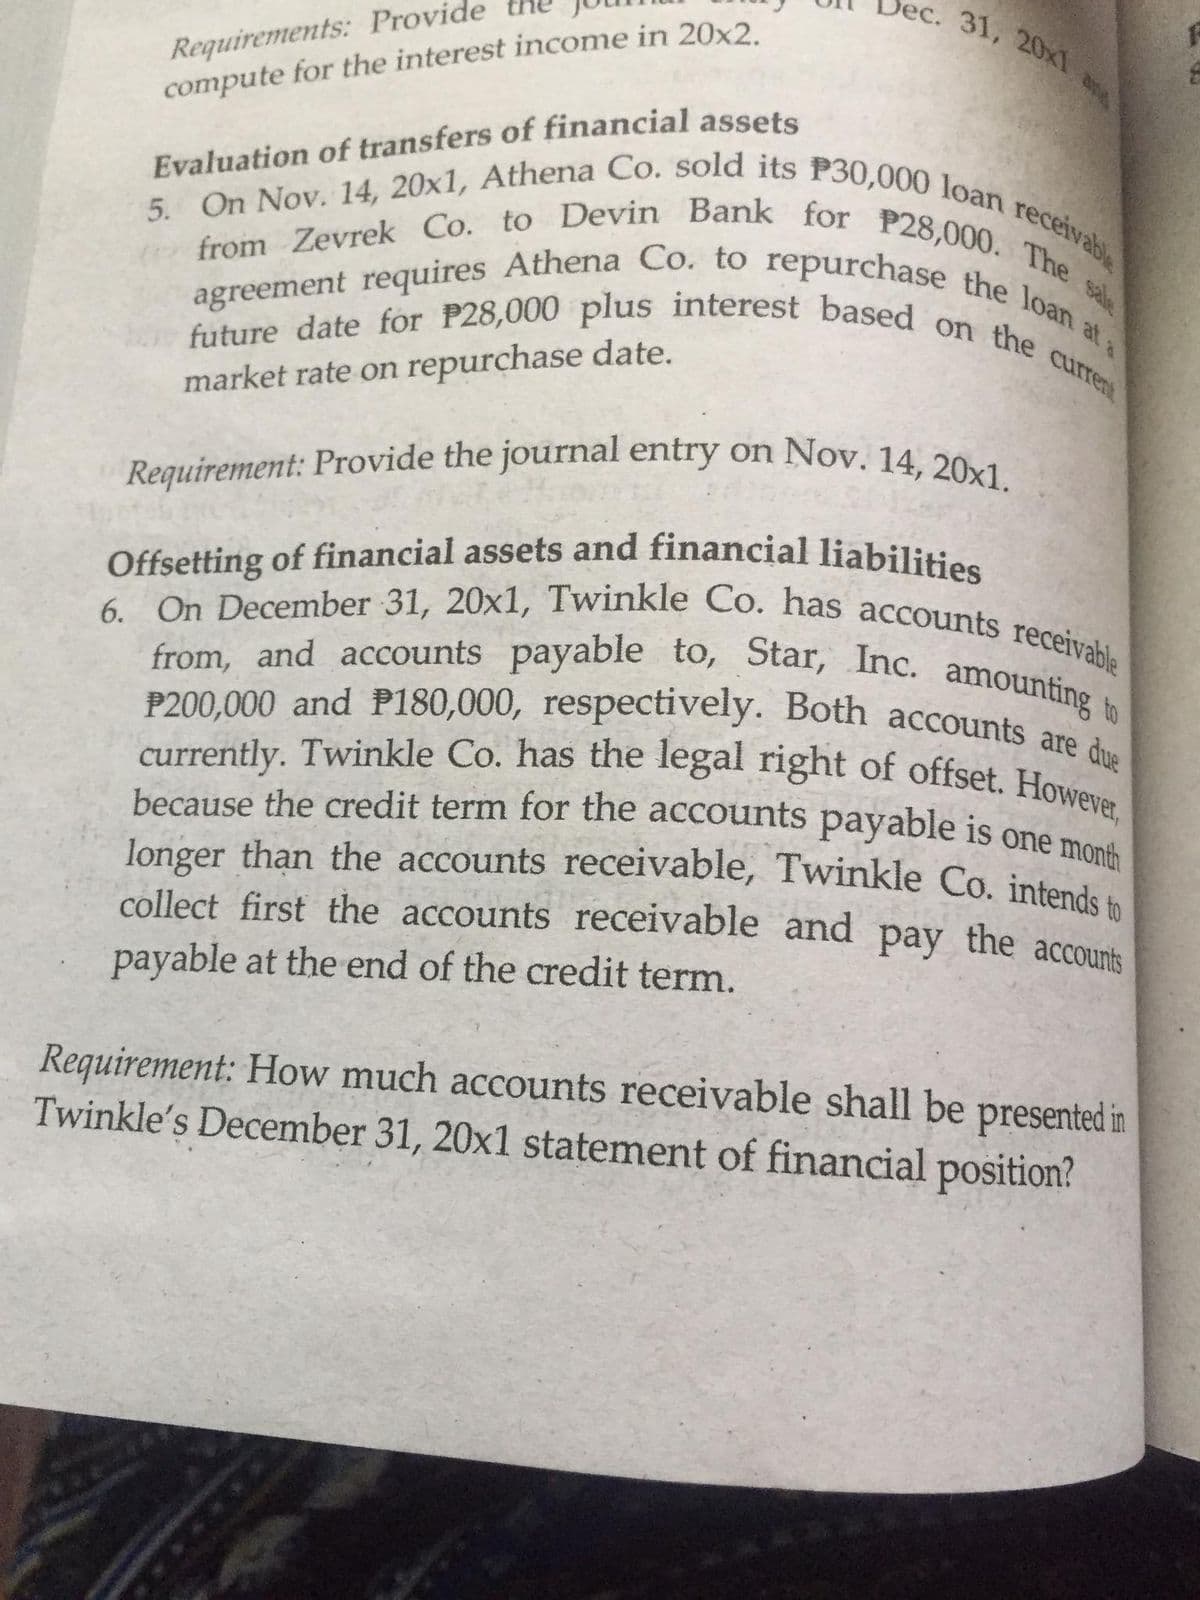 31, 20x1
Requirement: Provide the journal entry on Nov. 14, 20x1.
Offsetting of financial assets and financial liabilities
5. On Nov. 14, 20x1, Athena Co. sold its P30,000 loan receivabl
6. On December 31, 20x1, Twinkle Co. has accounts receivable
because the credit term for the accounts payable is one month
longer than the accounts receivable, Twinkle Co. intends to
currently. Twinkle Co. has the legal right of offset. However,
P200,000 and P180,000, respectively. Both accounts are due
from, and accounts payable to, Star, Inc. amounting to
Requirements: Provide
compute for the interest income in 20x2
from Zevrek Co. to Devin Bank for P28,000. The
future date for P28,000 plus interest based on the curre
agreement requires Athena Co. to repurchase the loan at
Evaluation of transfers of financial assets
market rate on repurchase date.
Offsetting of financial assets and financial liabilities
from, and accounts payable to, Star, Inc. amountine
P200,000 and P180,000, respectively. Both accounts a
because the credit term for the accounts payable is one mond
longer than the accounts receivable, Twinkle Co. intende
collect first the accounts receivable and pay the accounts
payable at the end of the credit term.
Requirement: How much accounts receivable shall be presented in
Twinkle's December 31, 20x1 statement of financial position?
